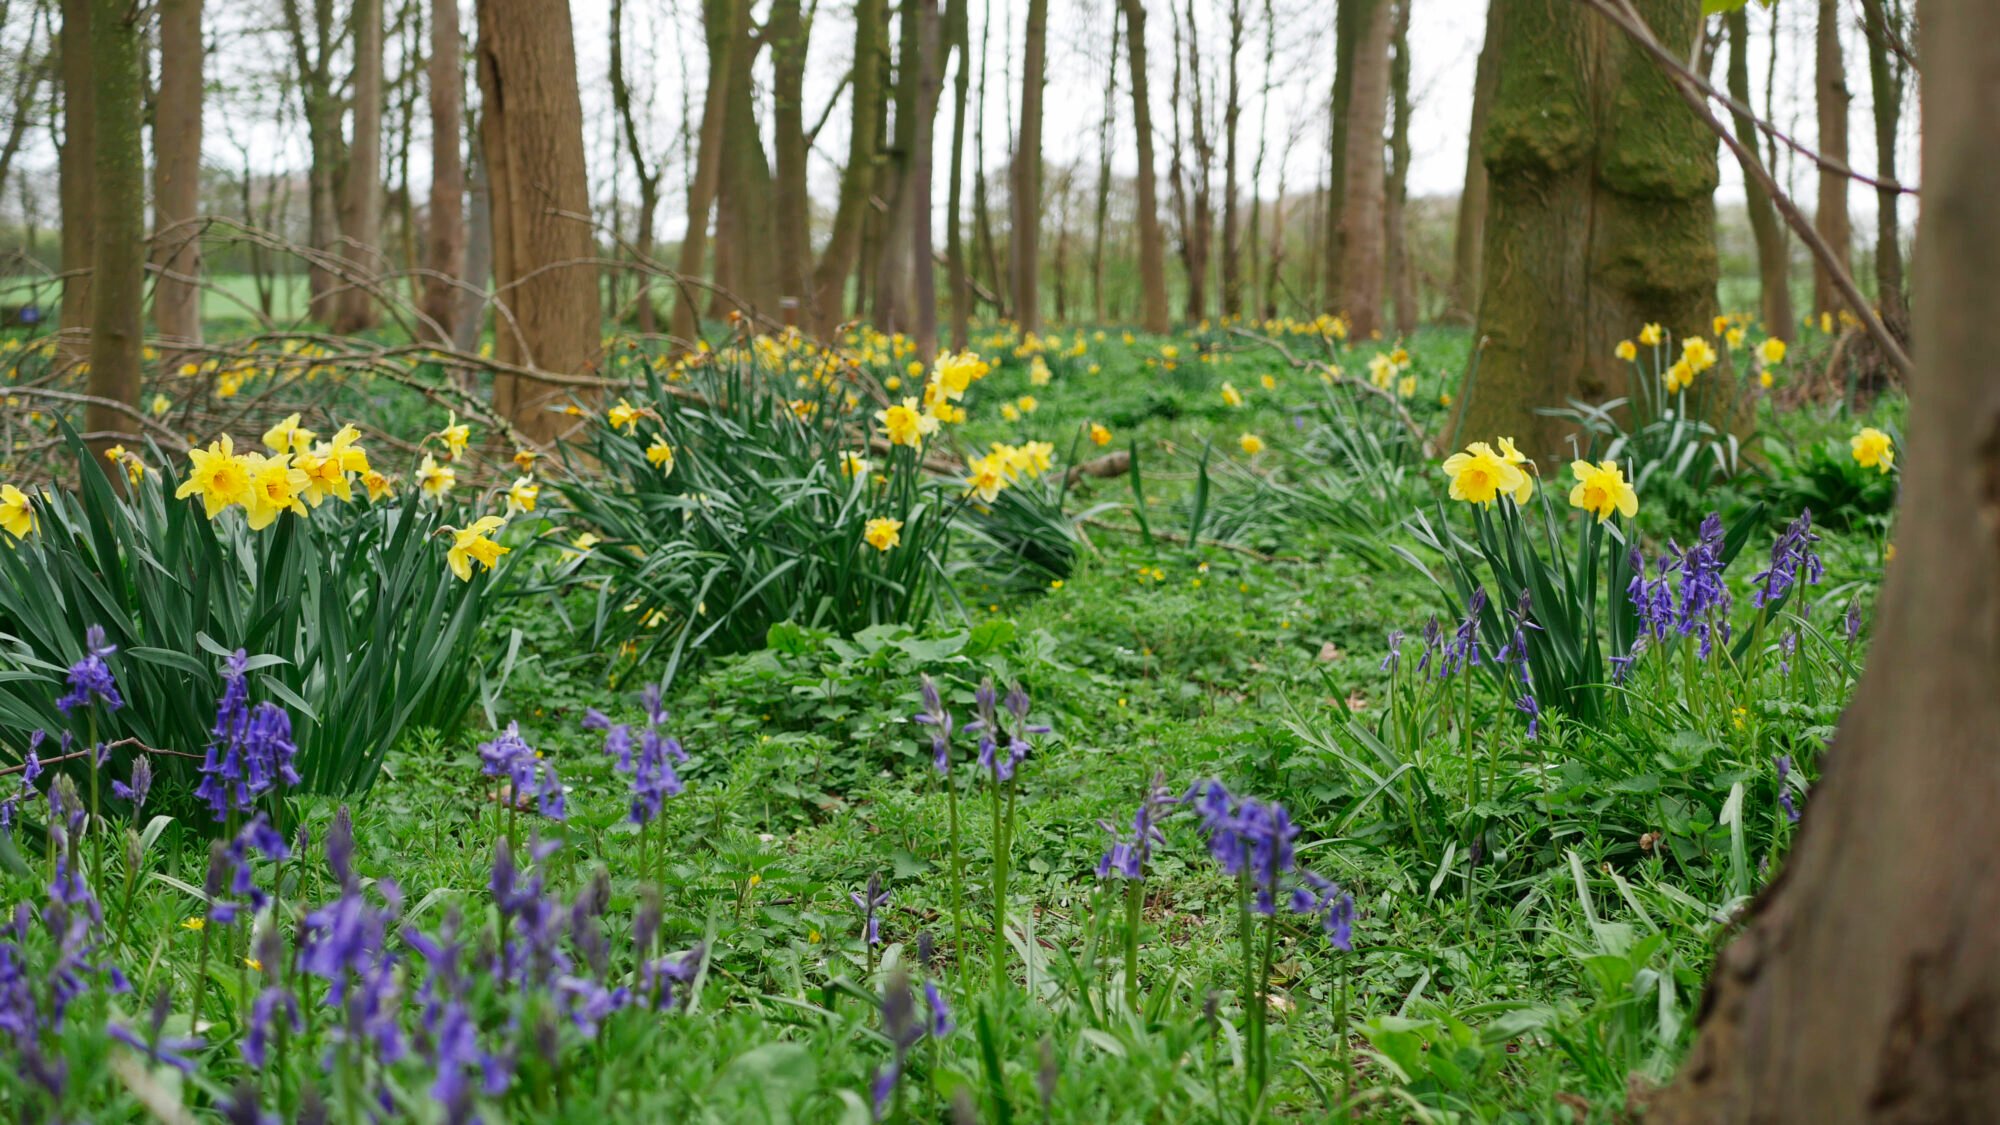 Image name daffodils at burton constable arboretum near hull the 17 image from the post Our List Of The Best Things To Do In Hull With Kids in Yorkshire.com.